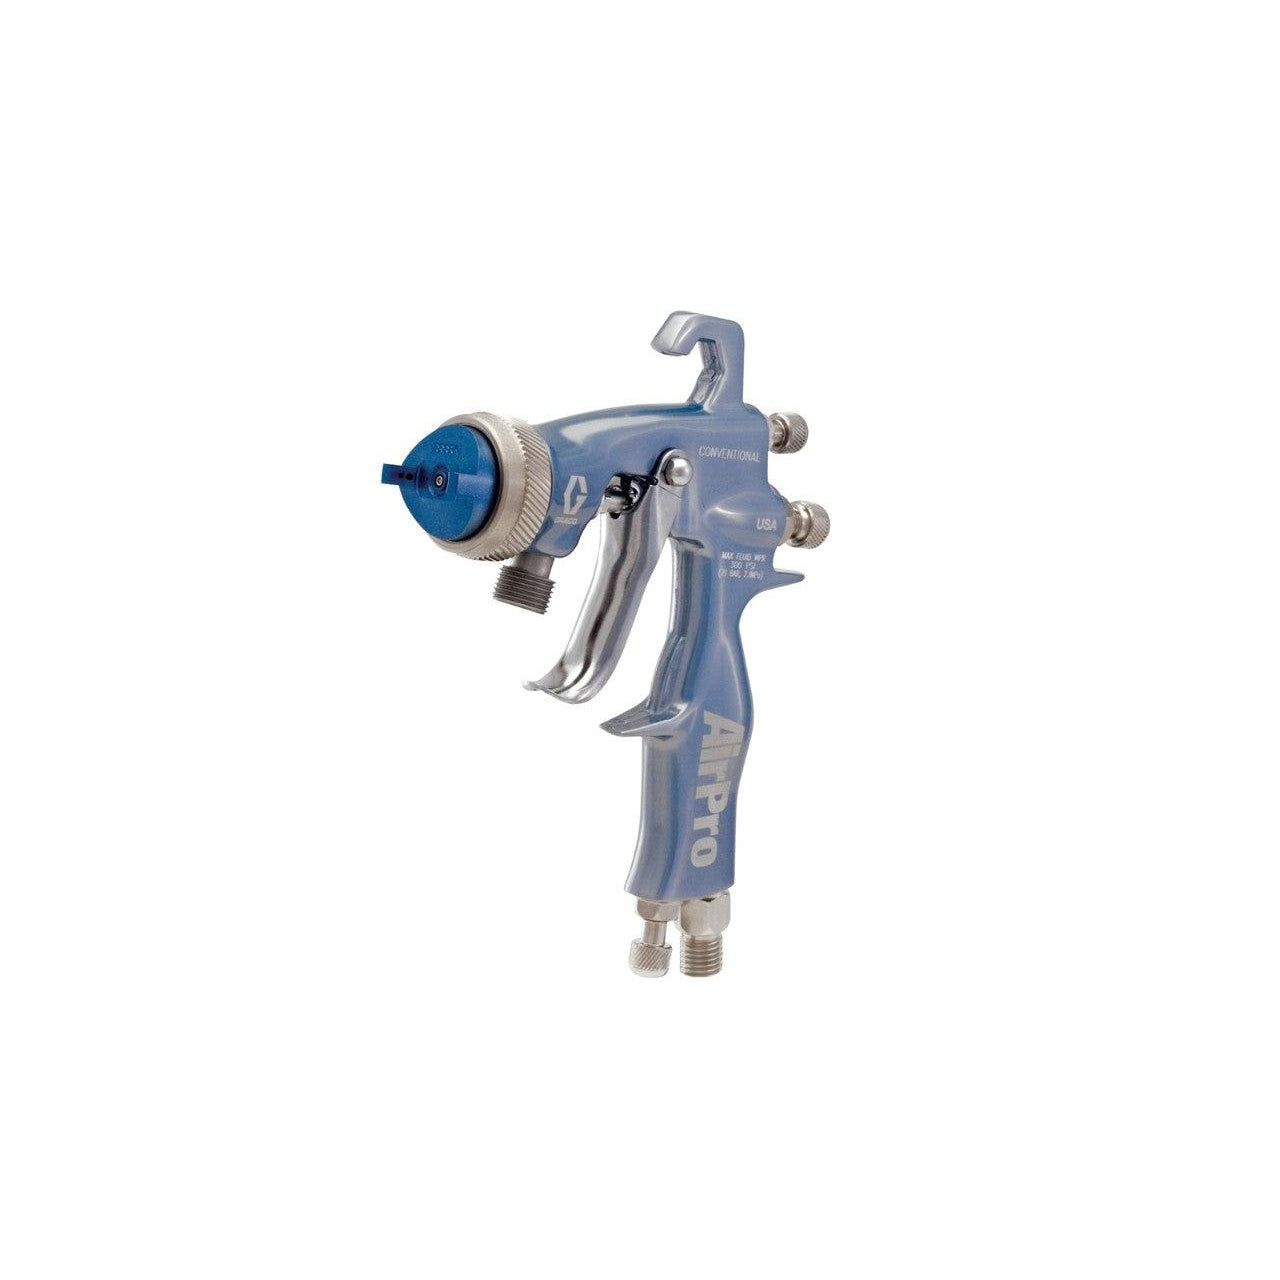 AirPro Air Spray Pressure Feed Gun, Conventional, 0.059 inch (1.5 mm) Nozzle, for High Wear Applications